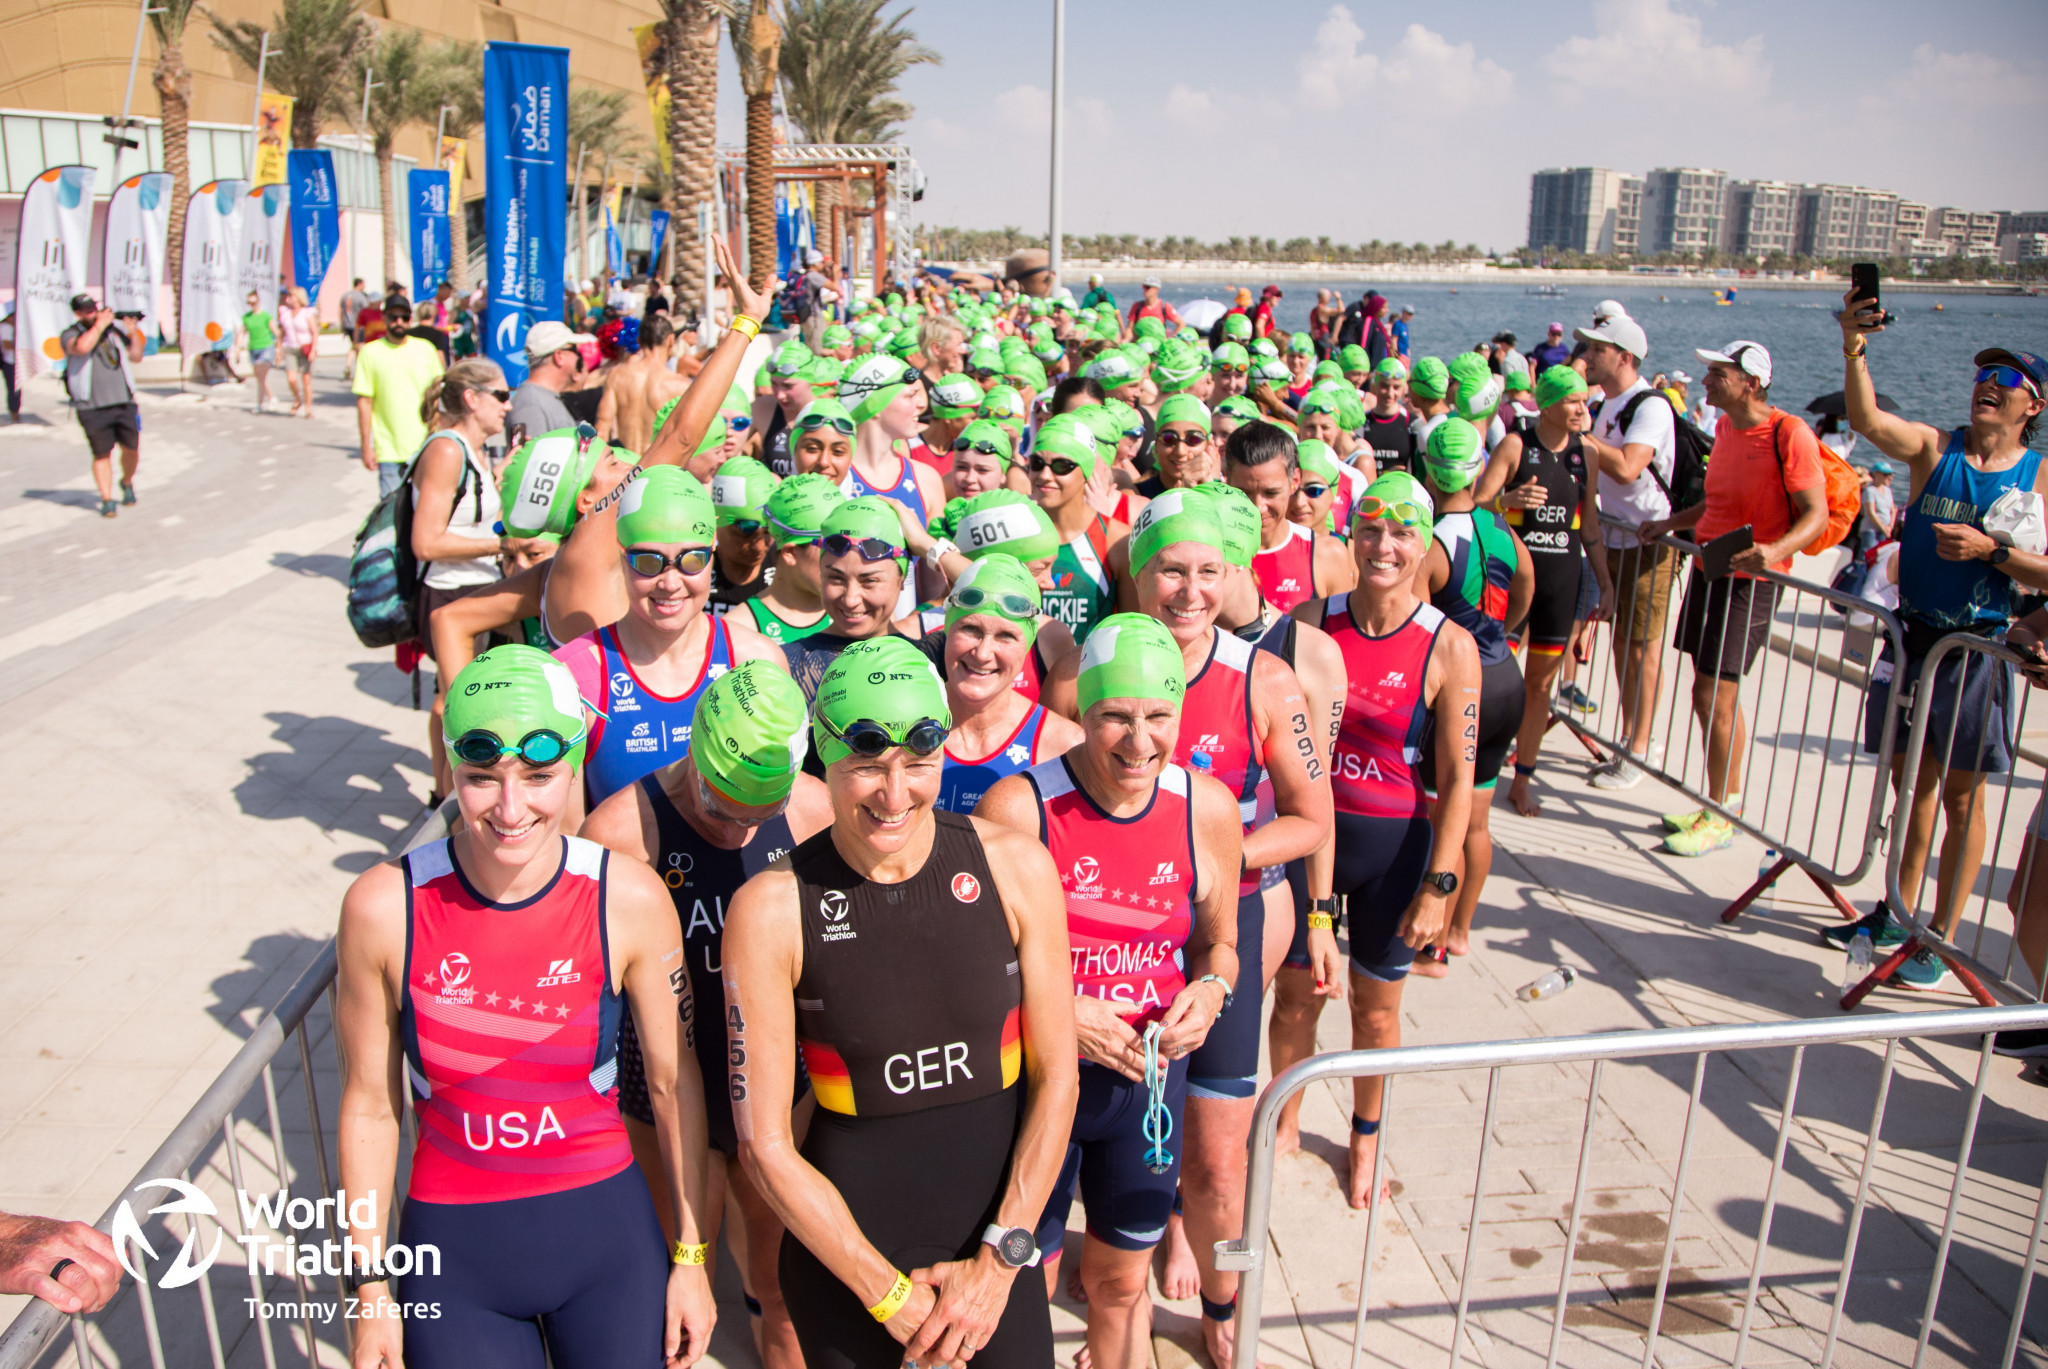 Age group races at the World Triathlon Championship Finals in Abu Dhabi were held for athletes ranging from 15 to 19 up to the over-85 brackets ©World Triathlon